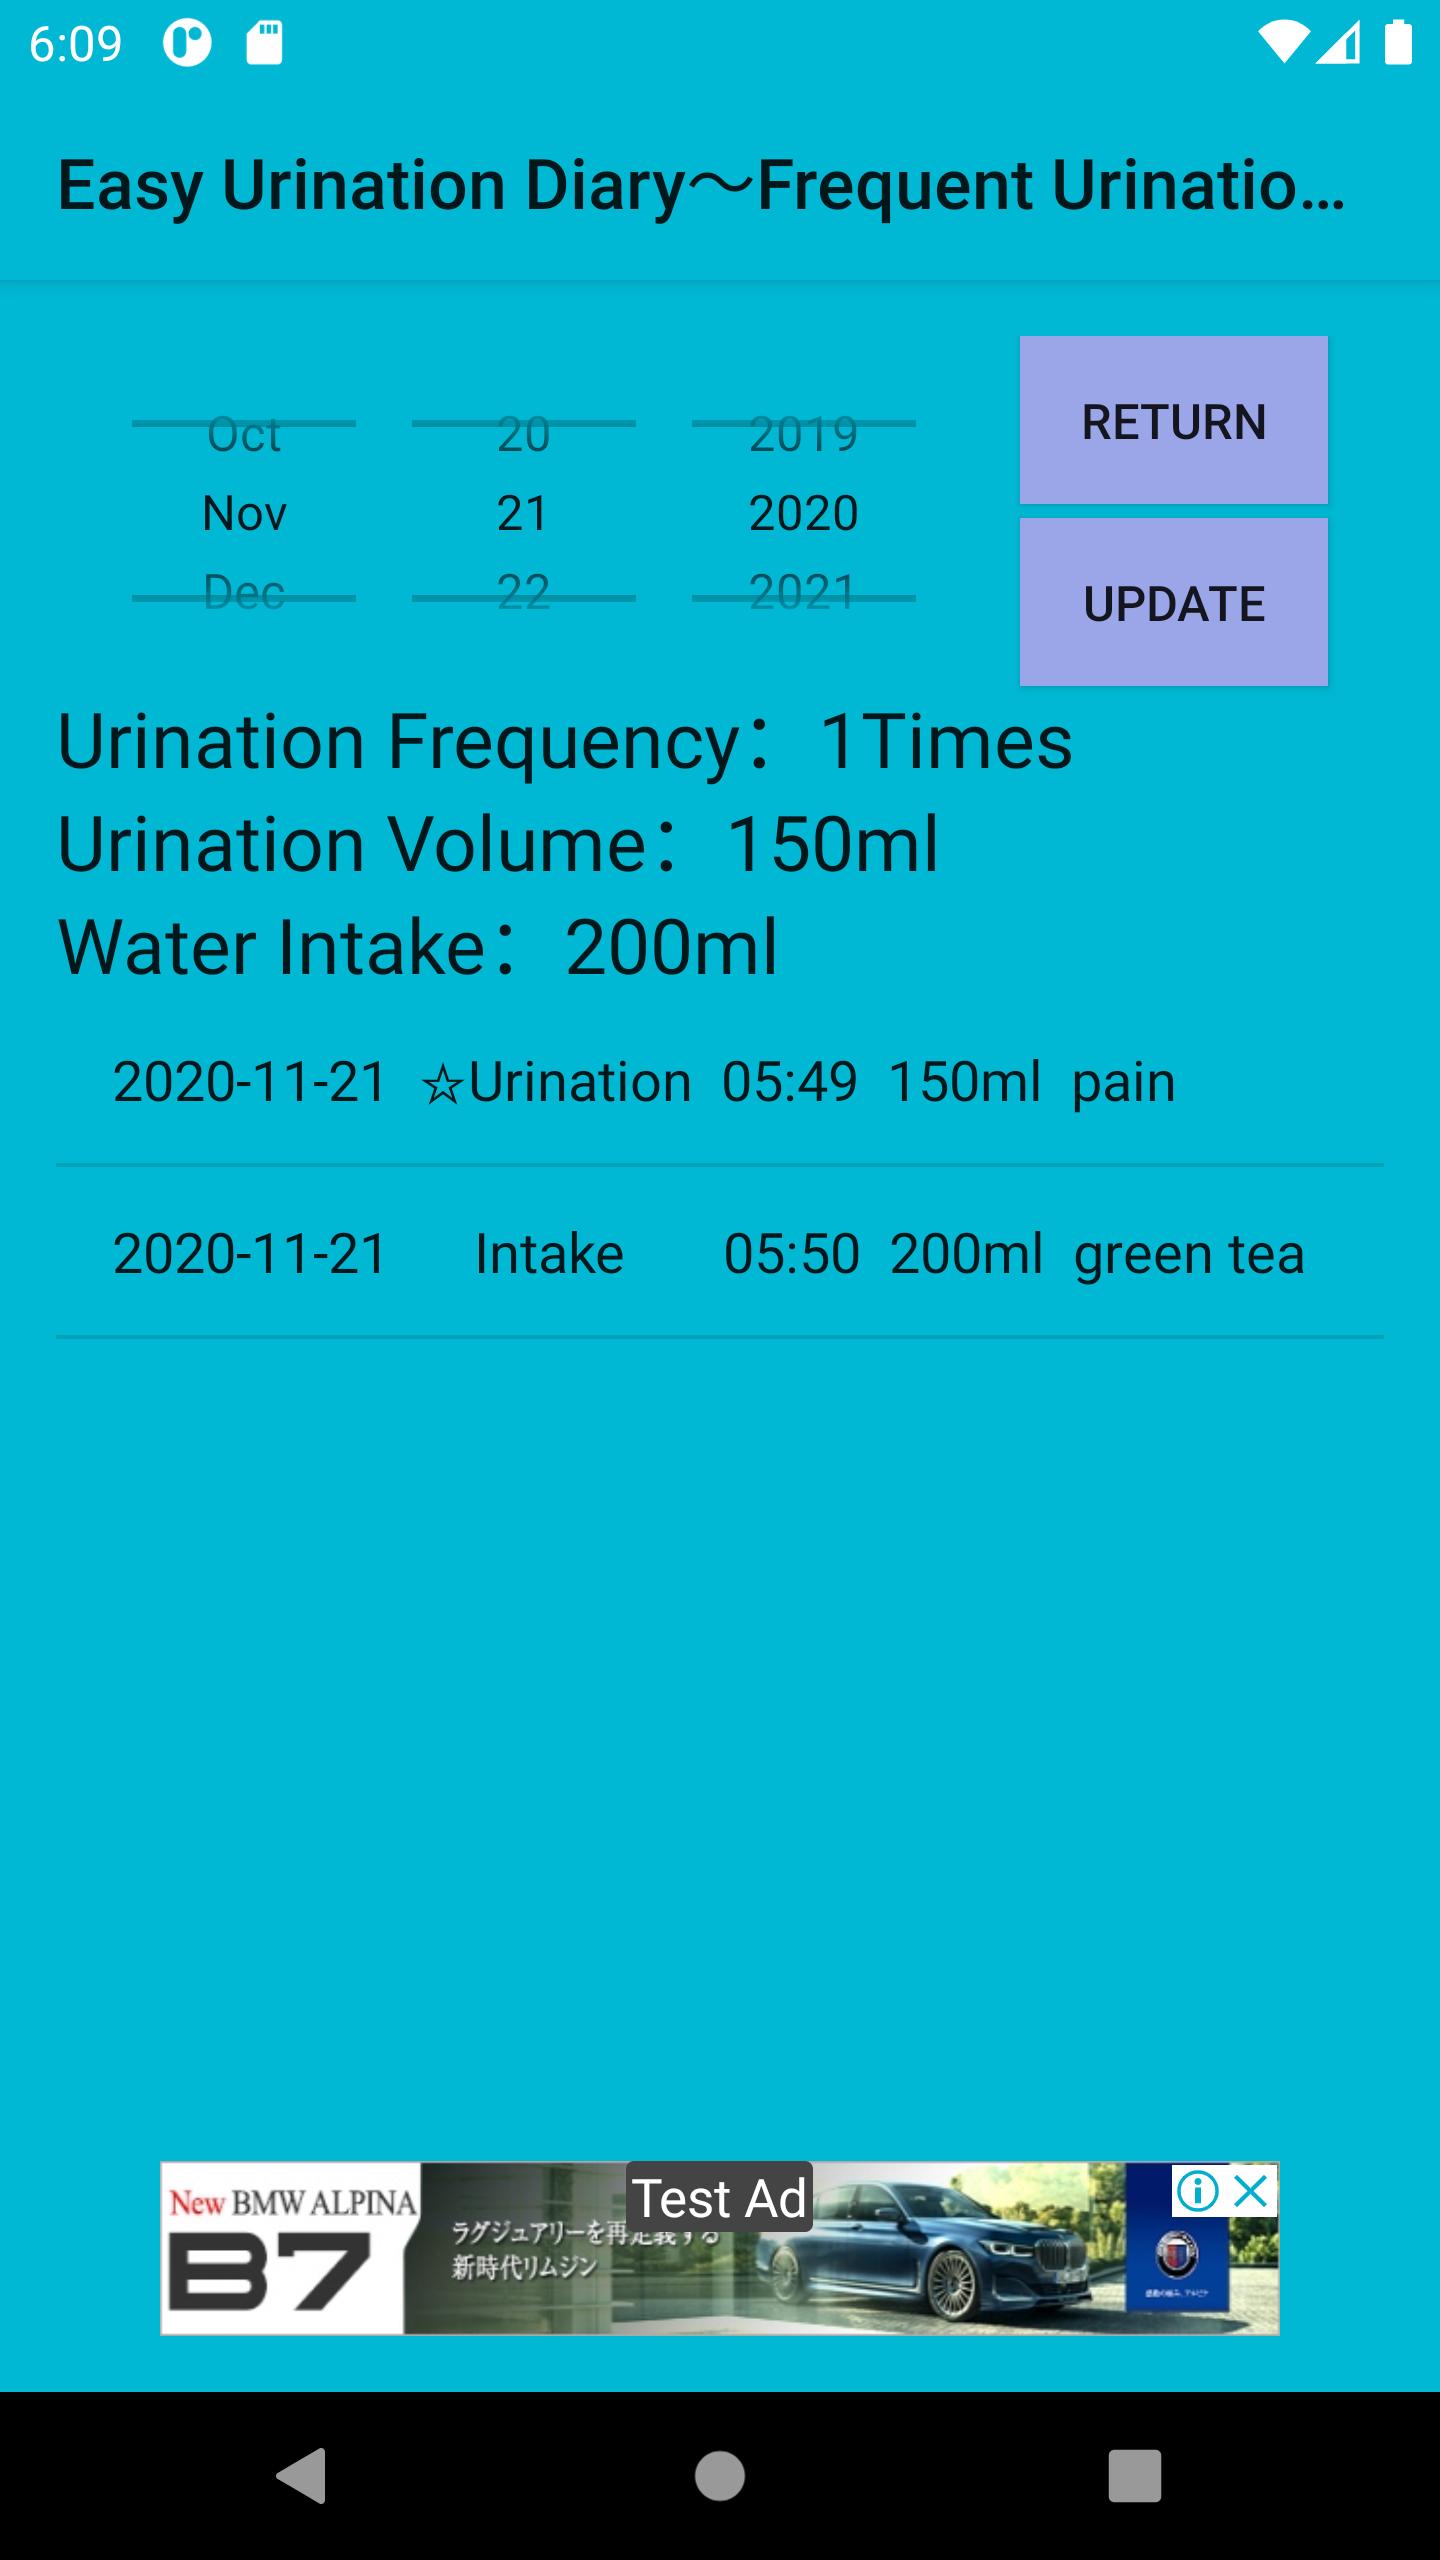 Easy Urination Diary～Frequent Urination～ 7.0 Screenshot 5